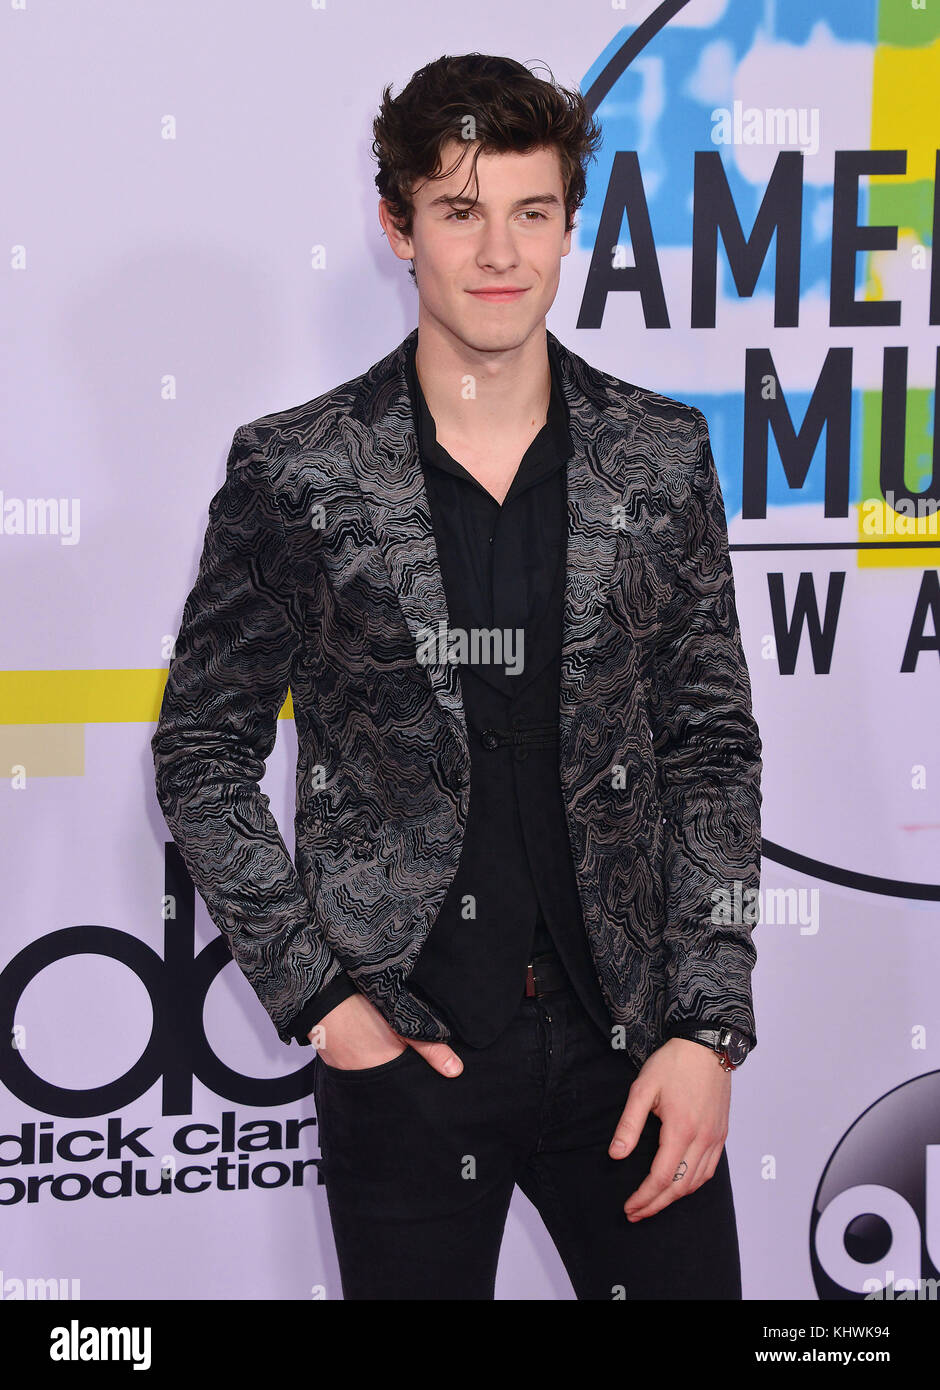 Los Angeles, USA. 19th Nov, 2017. Shawn Mendes 291 arrives at the 2017 American Music Awards at Microsoft Theater on November 19, 2017 in Los Angeles, California Credit: Tsuni/USA/Alamy Live News Stock Photo